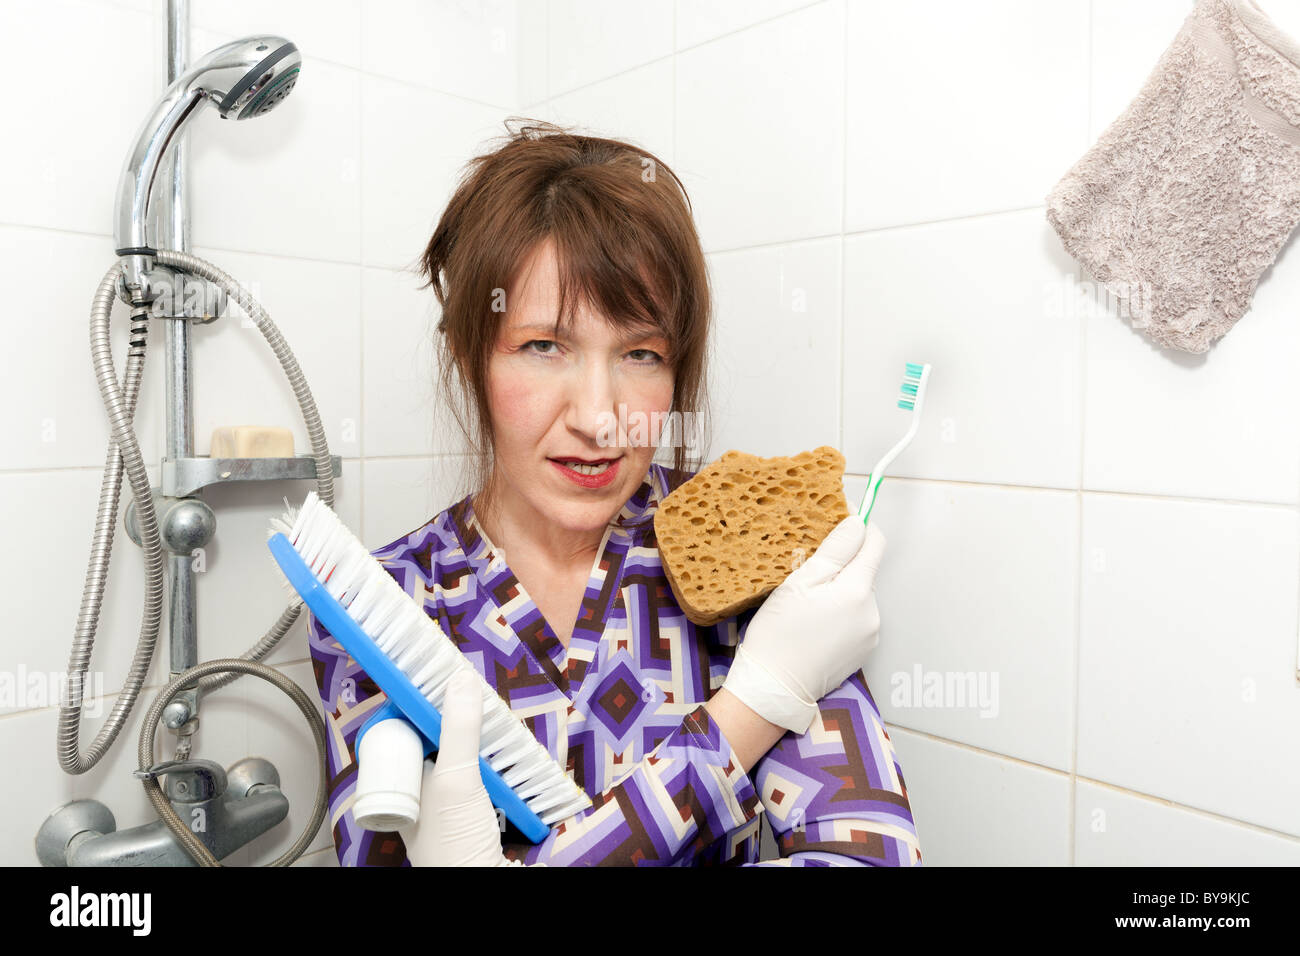 funny woman holding brushes ready to wash bathroom shower Stock Photo